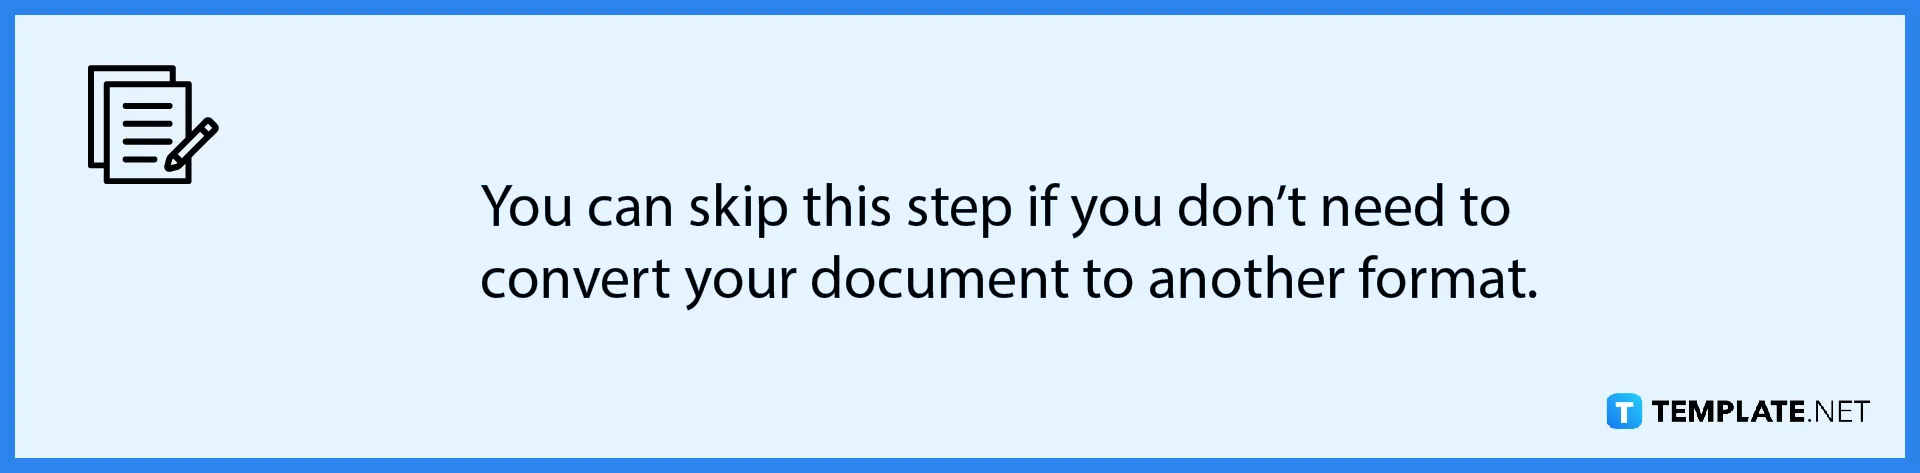 how-to-save-a-document-in-microsoft-word-note-2